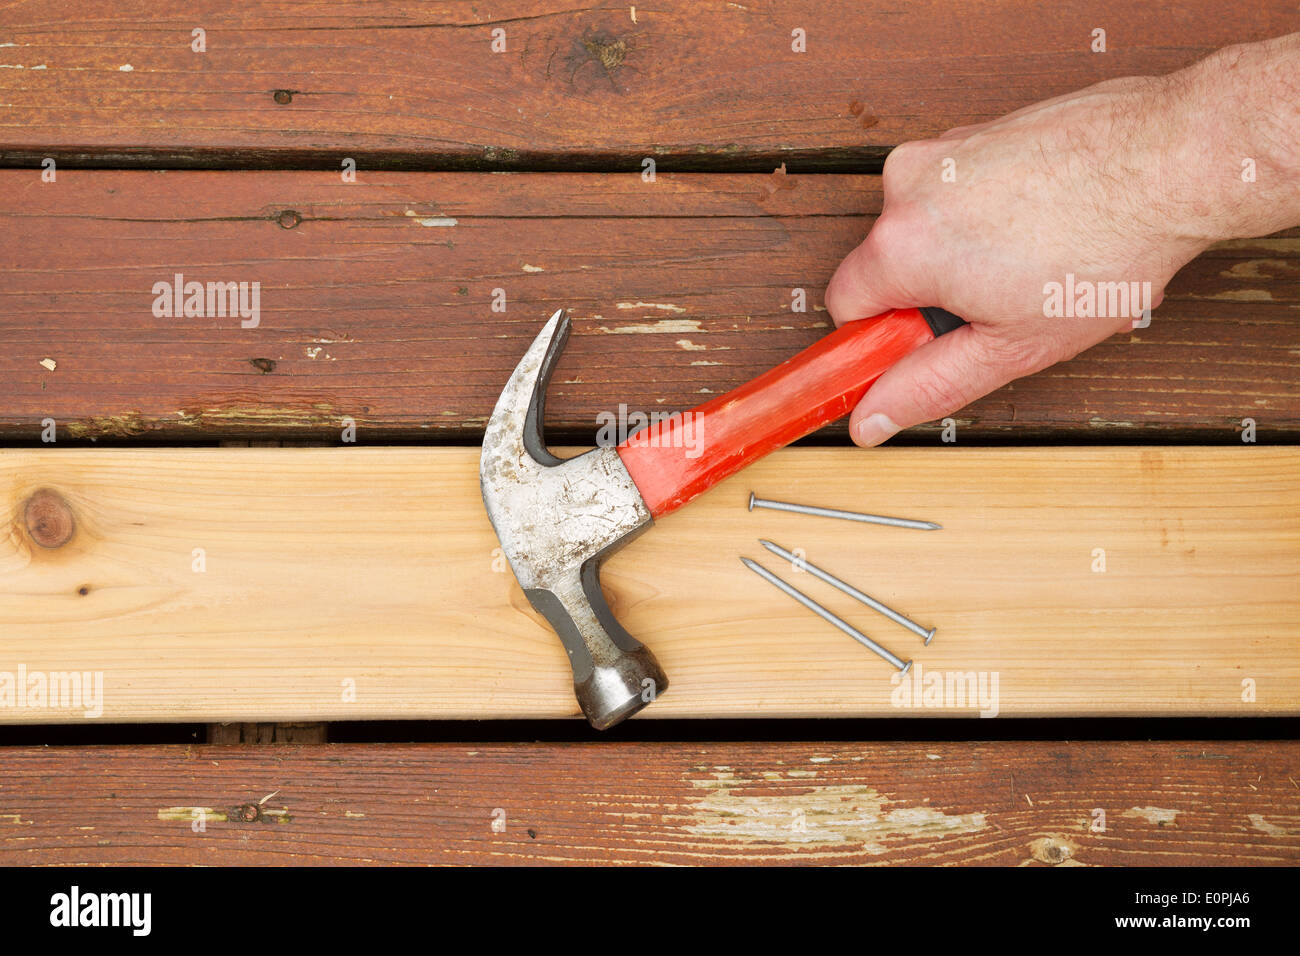 Horizontal photo of male hand picking up old hammer to install new cedar wood board into aging deck Stock Photo